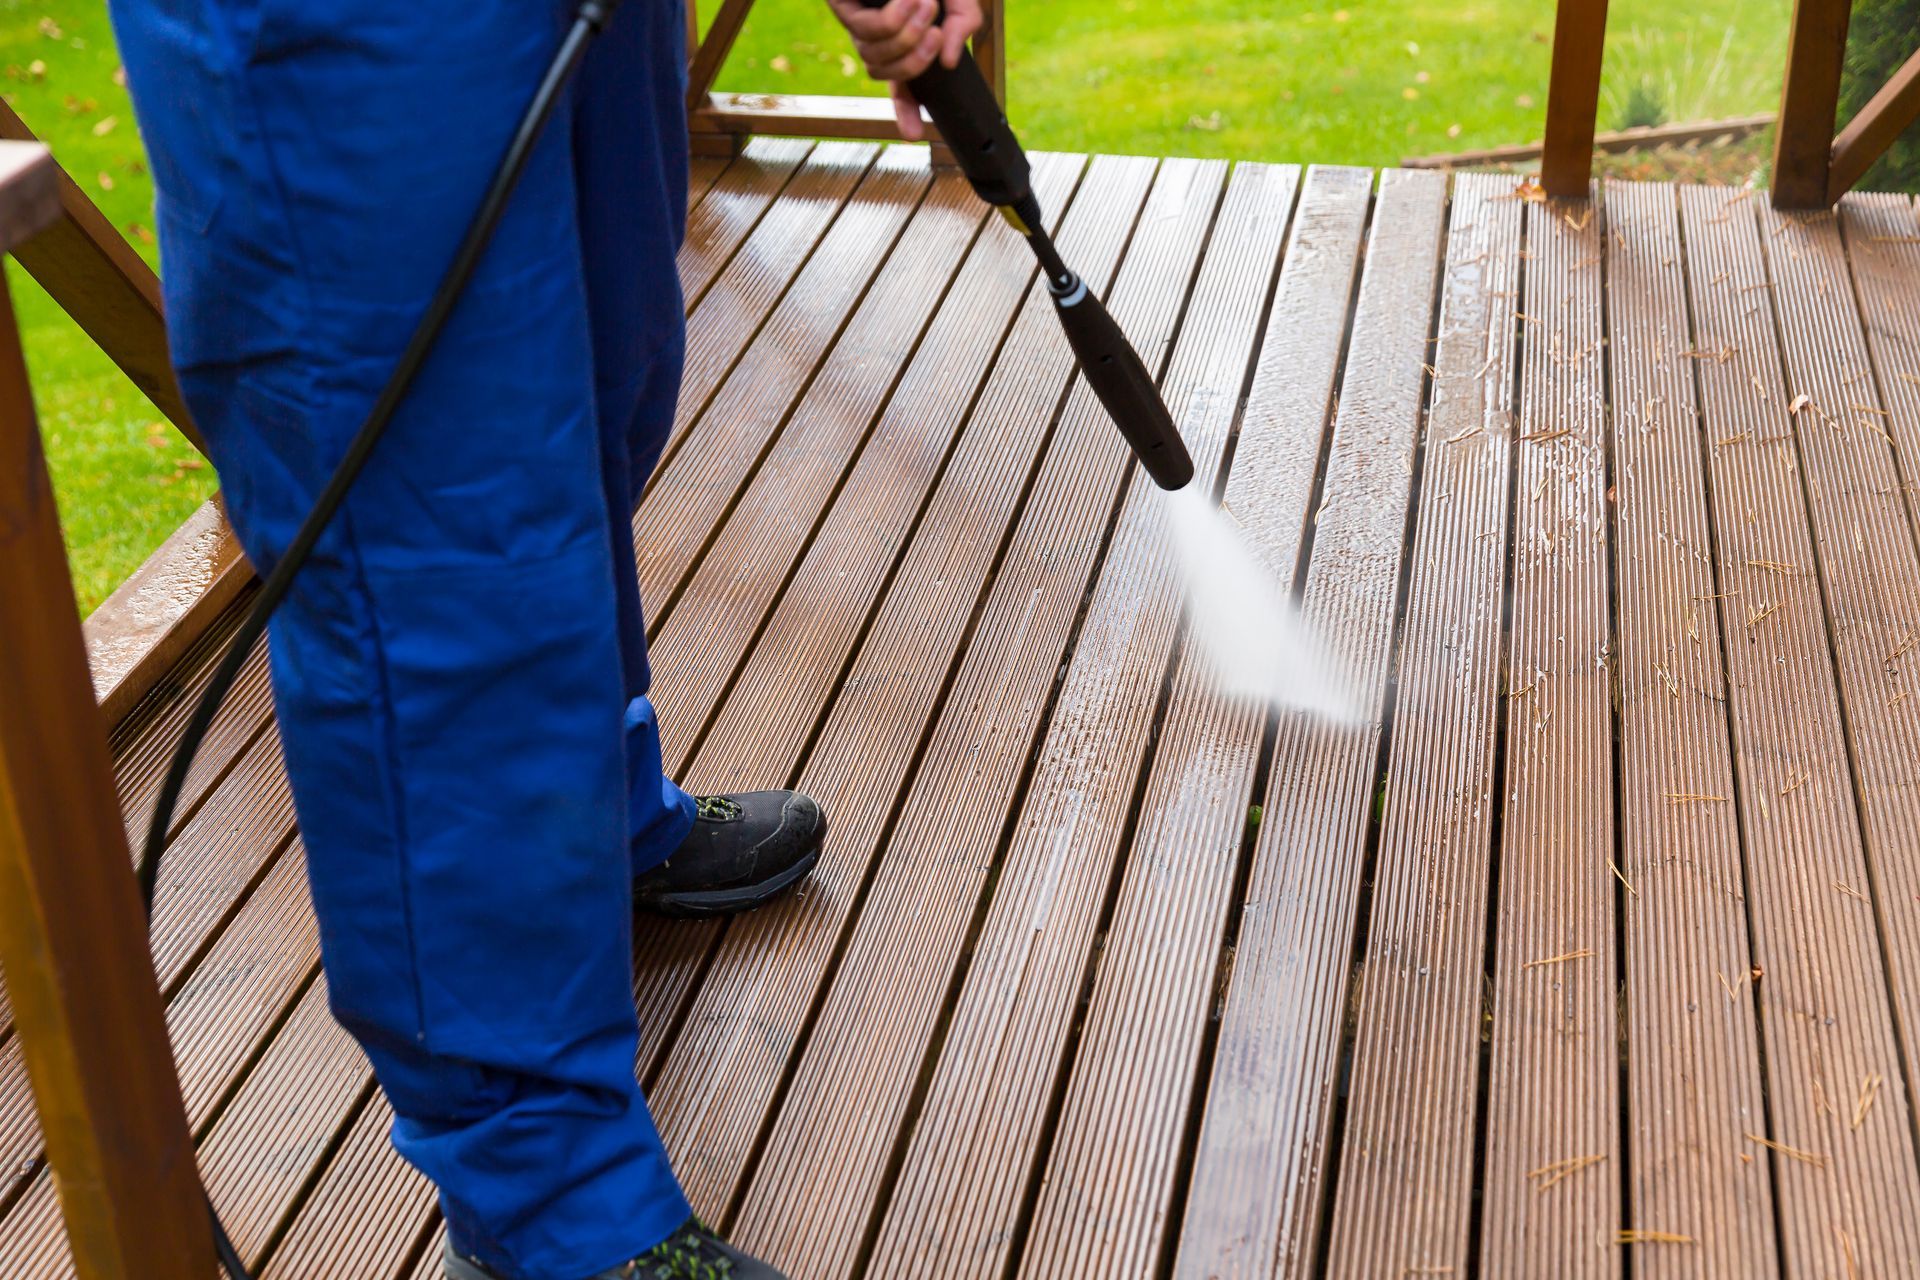 cleaning wooden deck with pressure washer